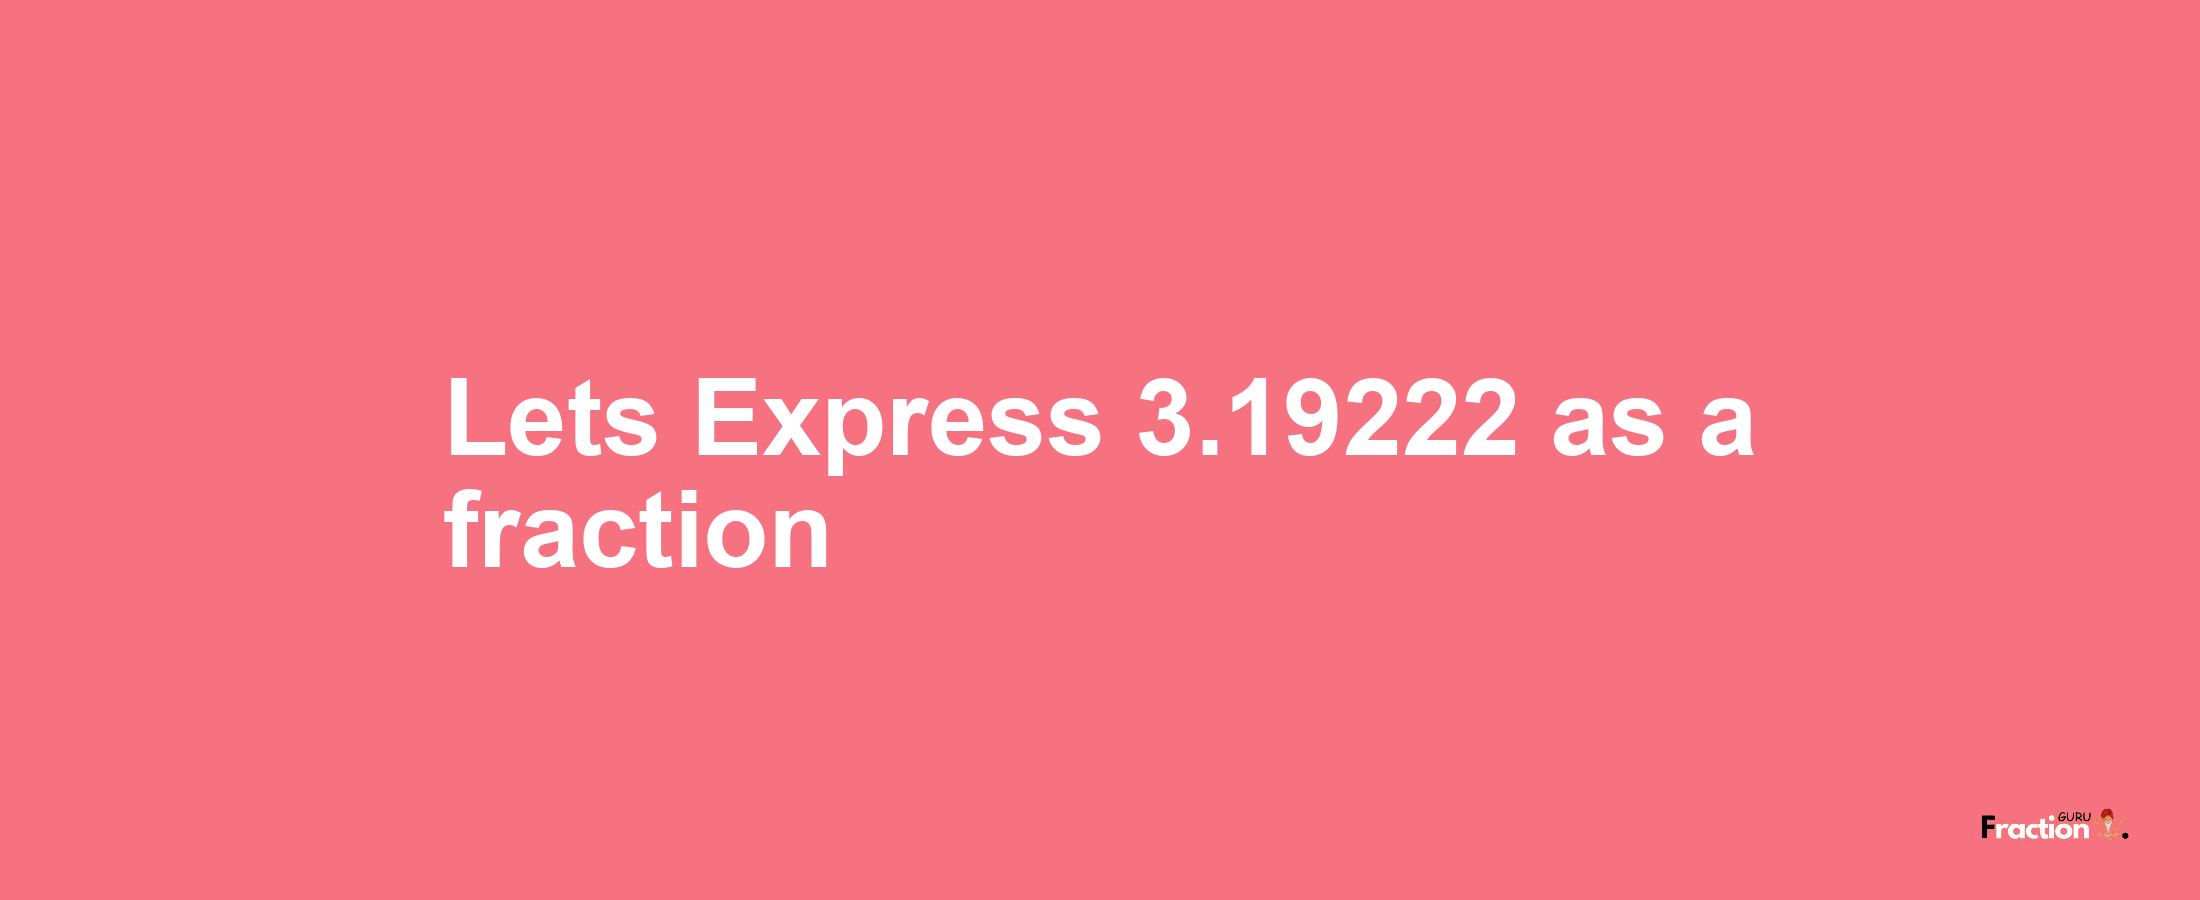 Lets Express 3.19222 as afraction